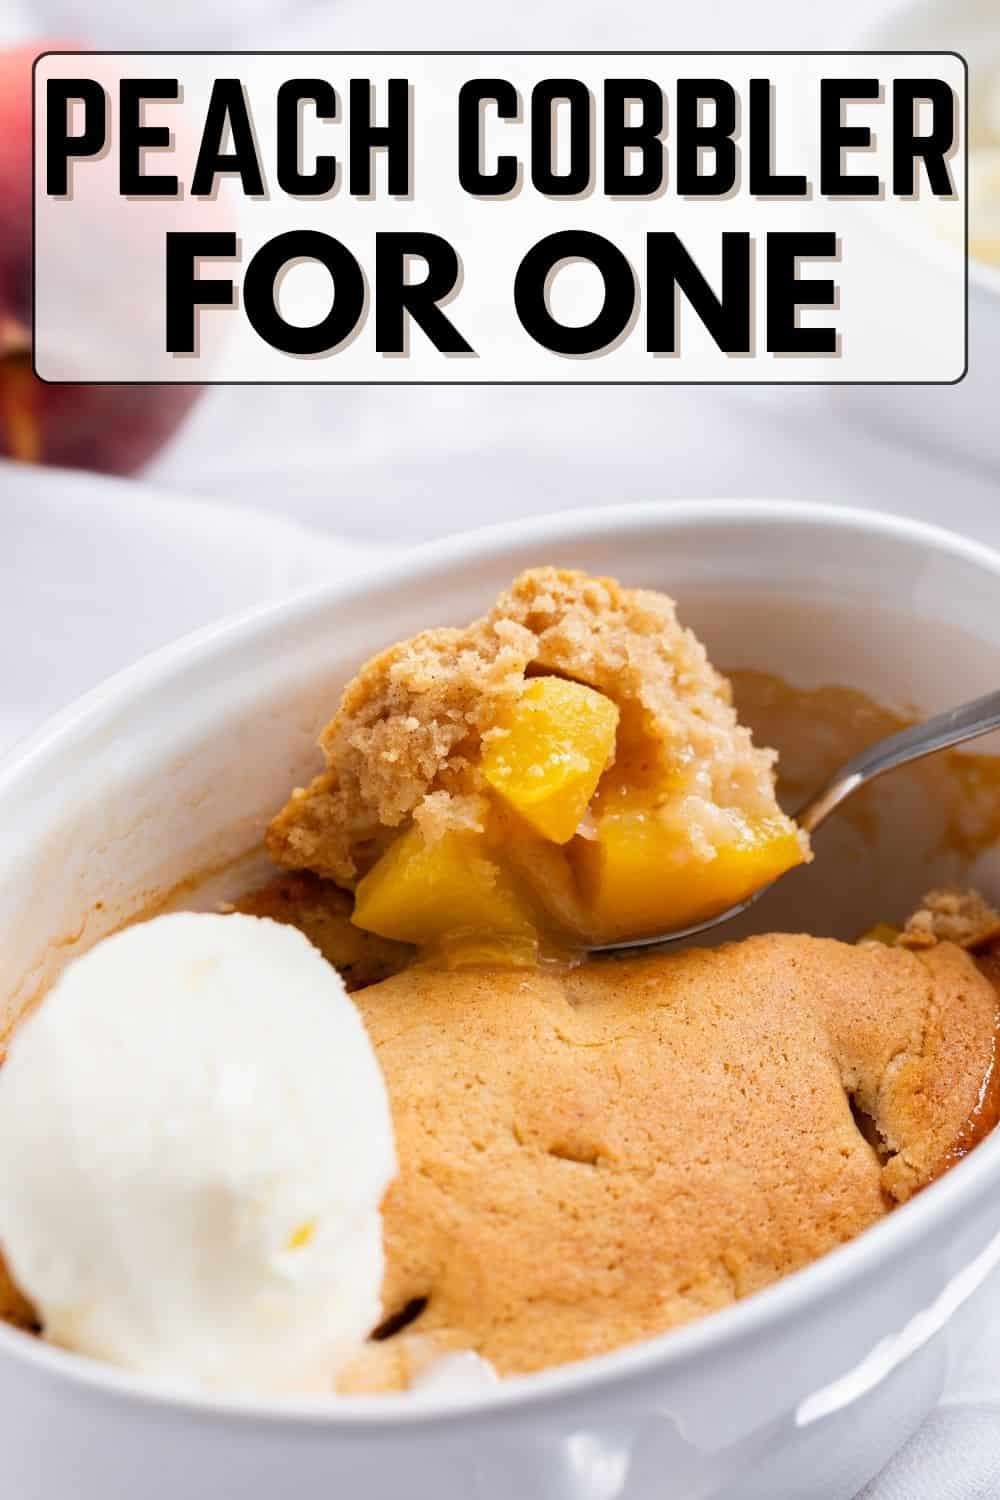 A delicious and satisfying dessert recipe for peach cobbler, specifically designed to serve just one person.